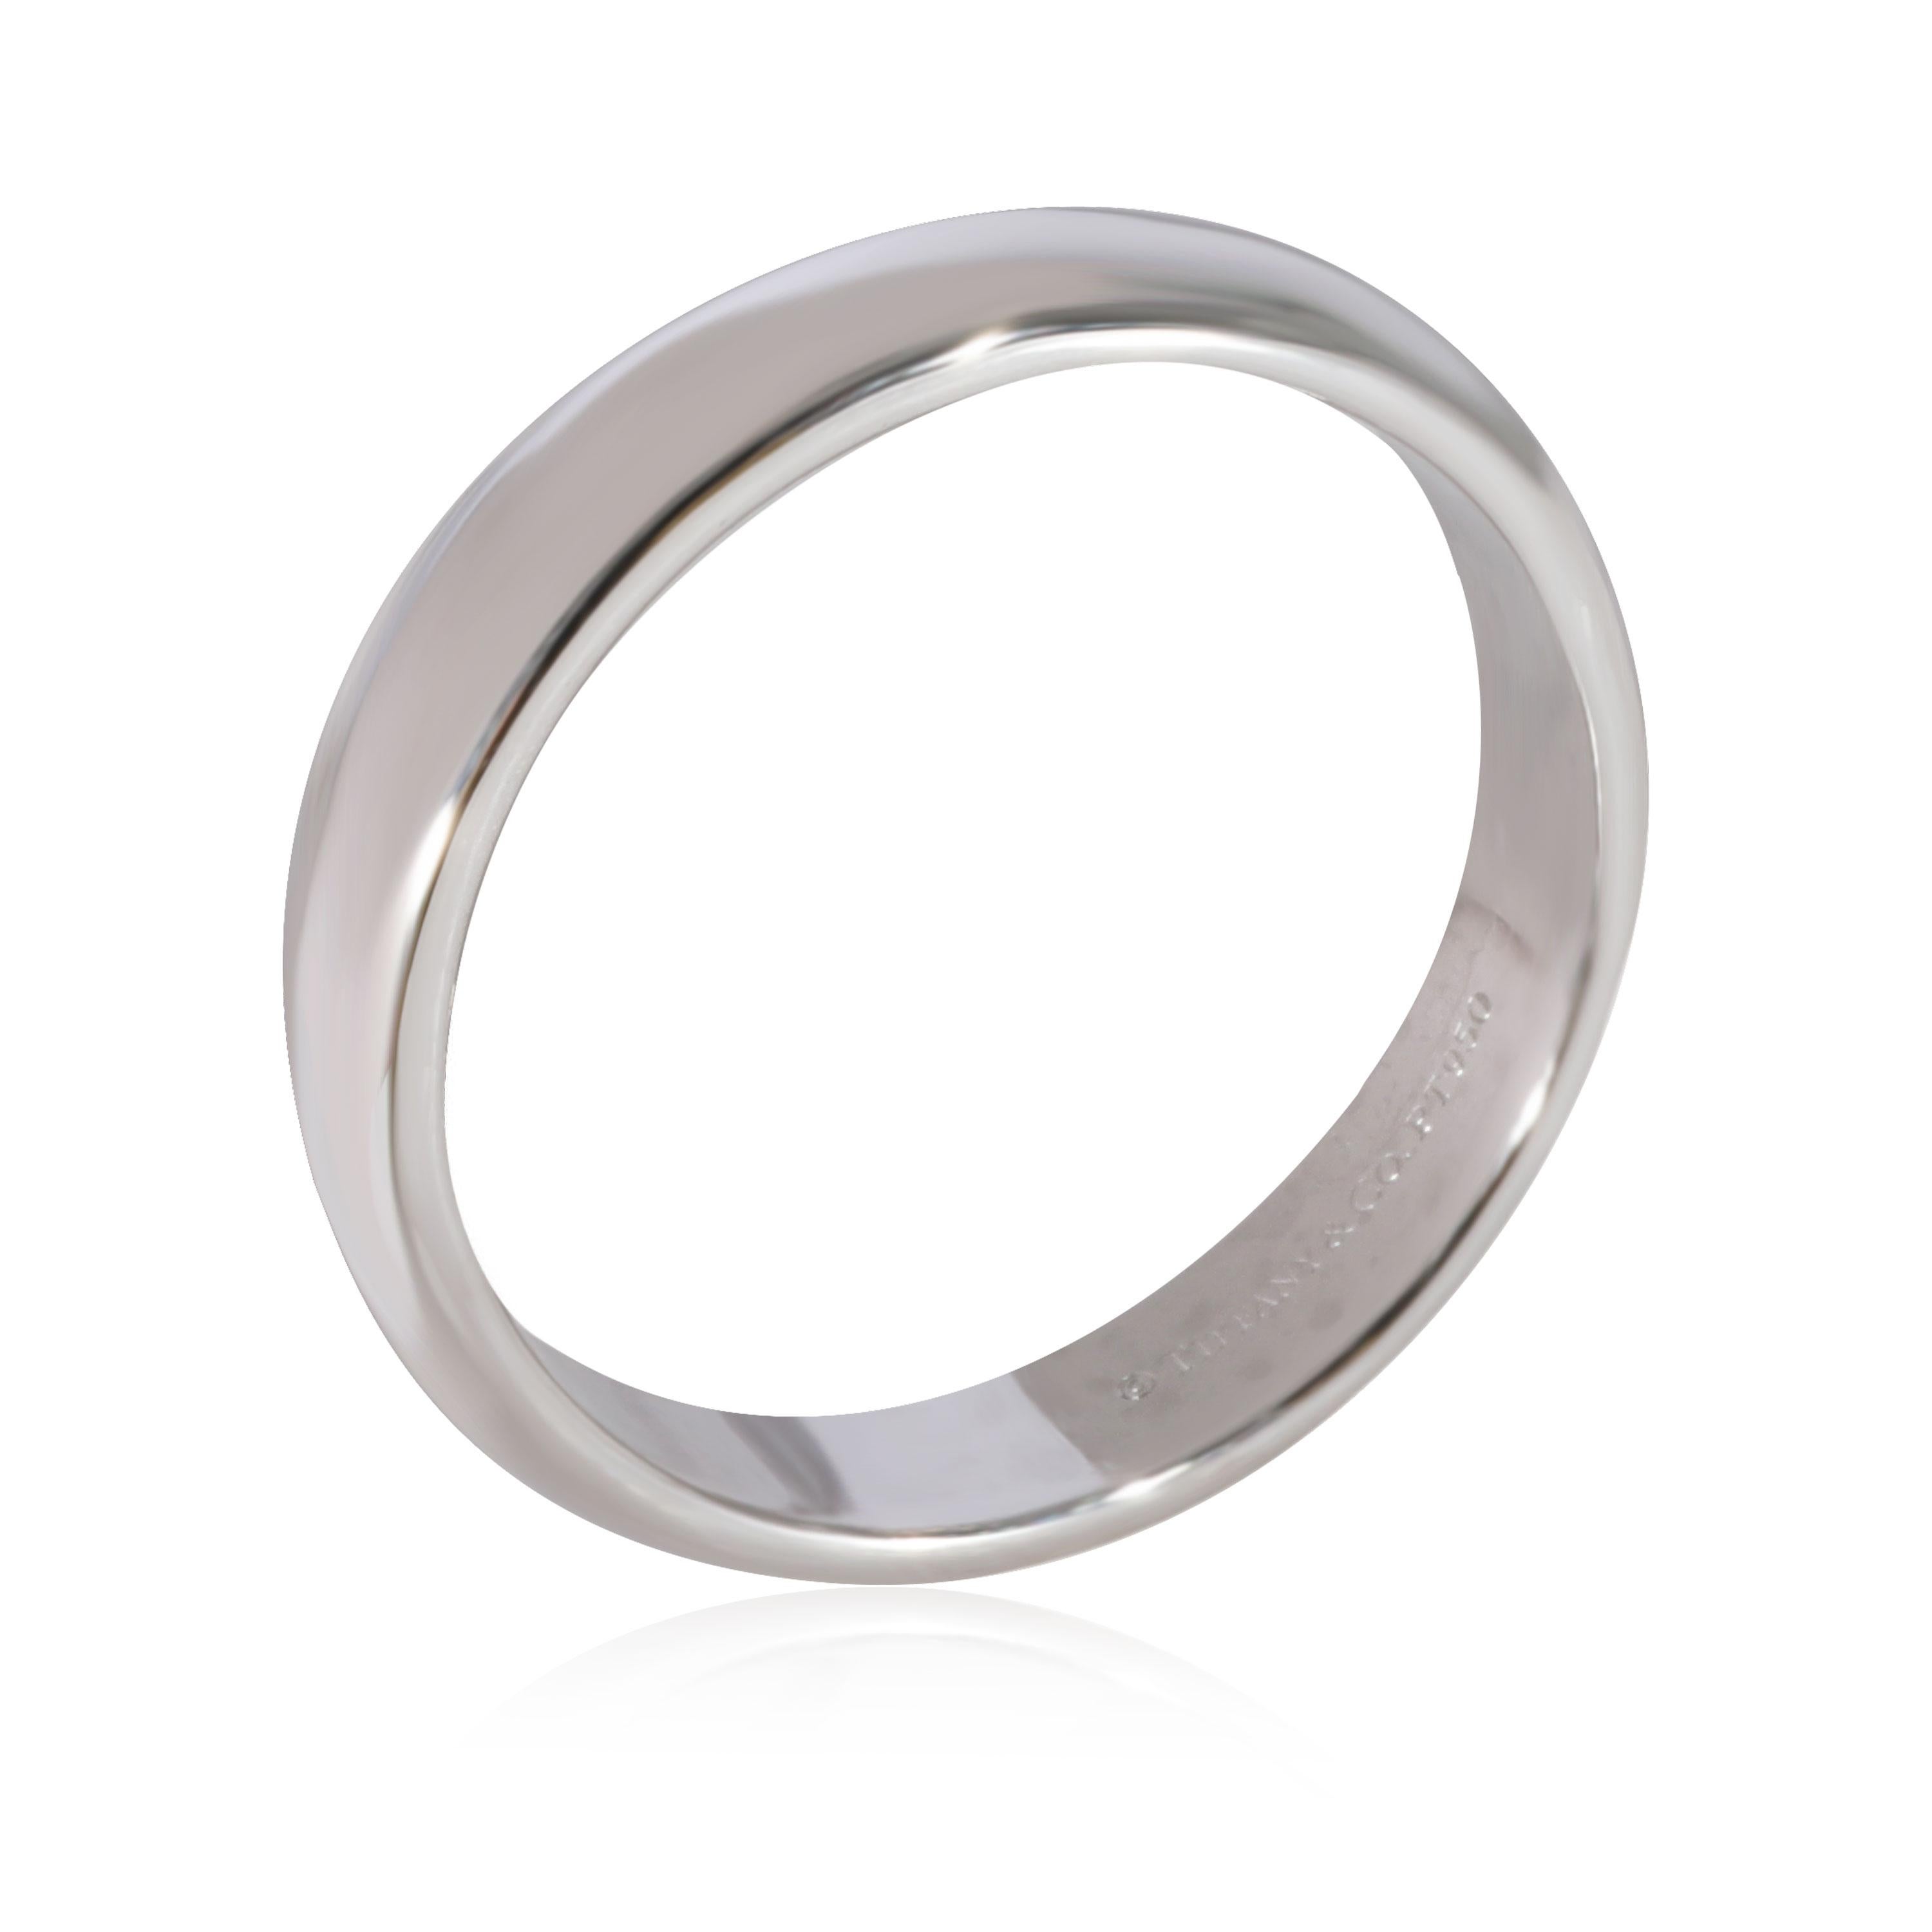 Tiffany & Co. Classic Wedding Band in Platinum
 
 PRIMARY DETAILS
 SKU: 127370
 Listing Title: Tiffany & Co. Classic Wedding Band in Platinum
 Condition Description: Retails for 1650 USD. In excellent condition and recently polished. Ring size is